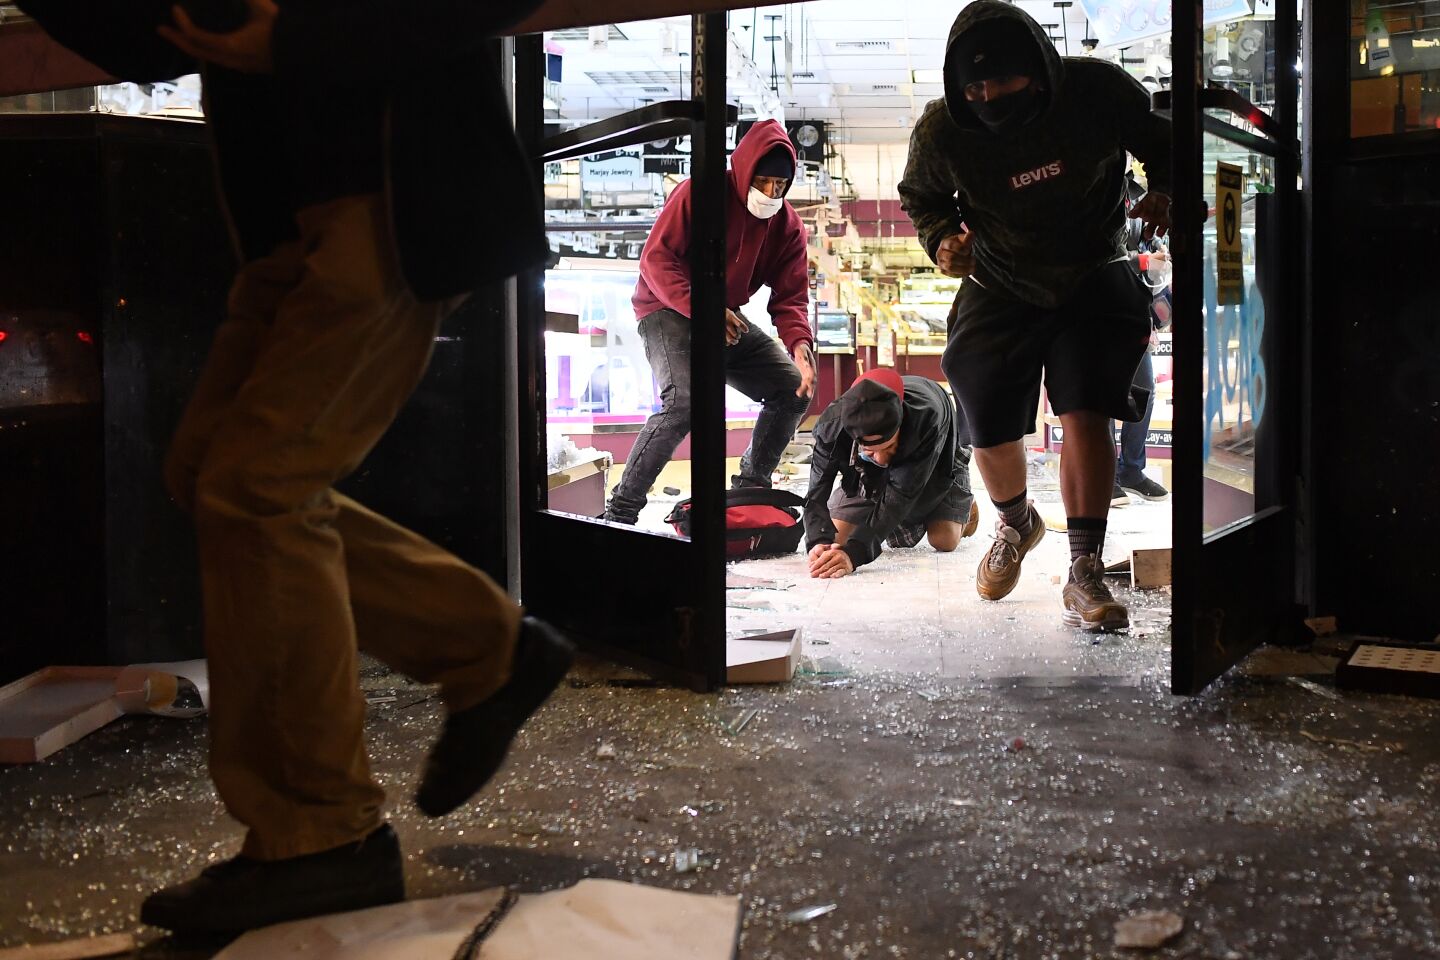 Looters run from a burglarized jewelry store as LAPD officers approach in downtown Los Angeles